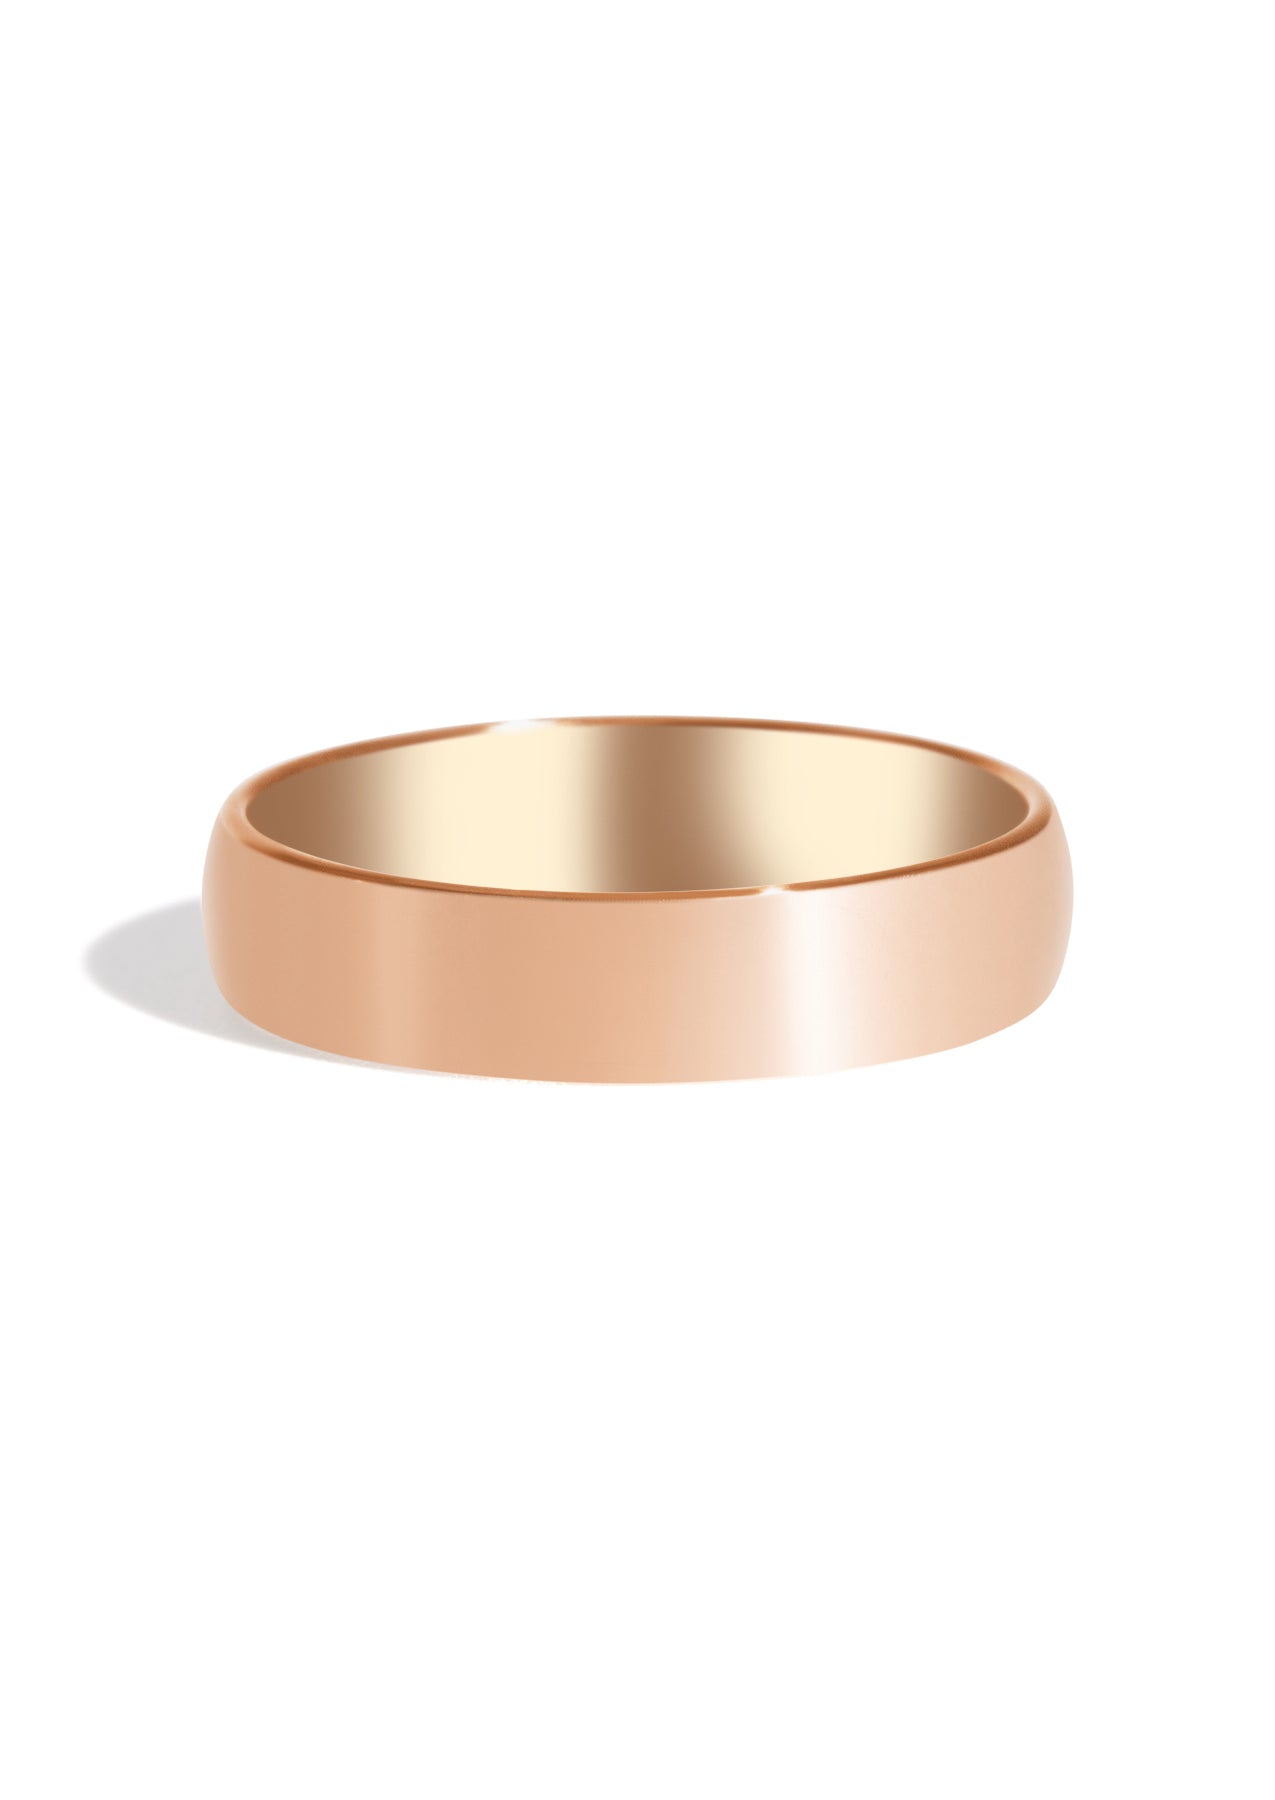 The Hearth Rose Gold Band